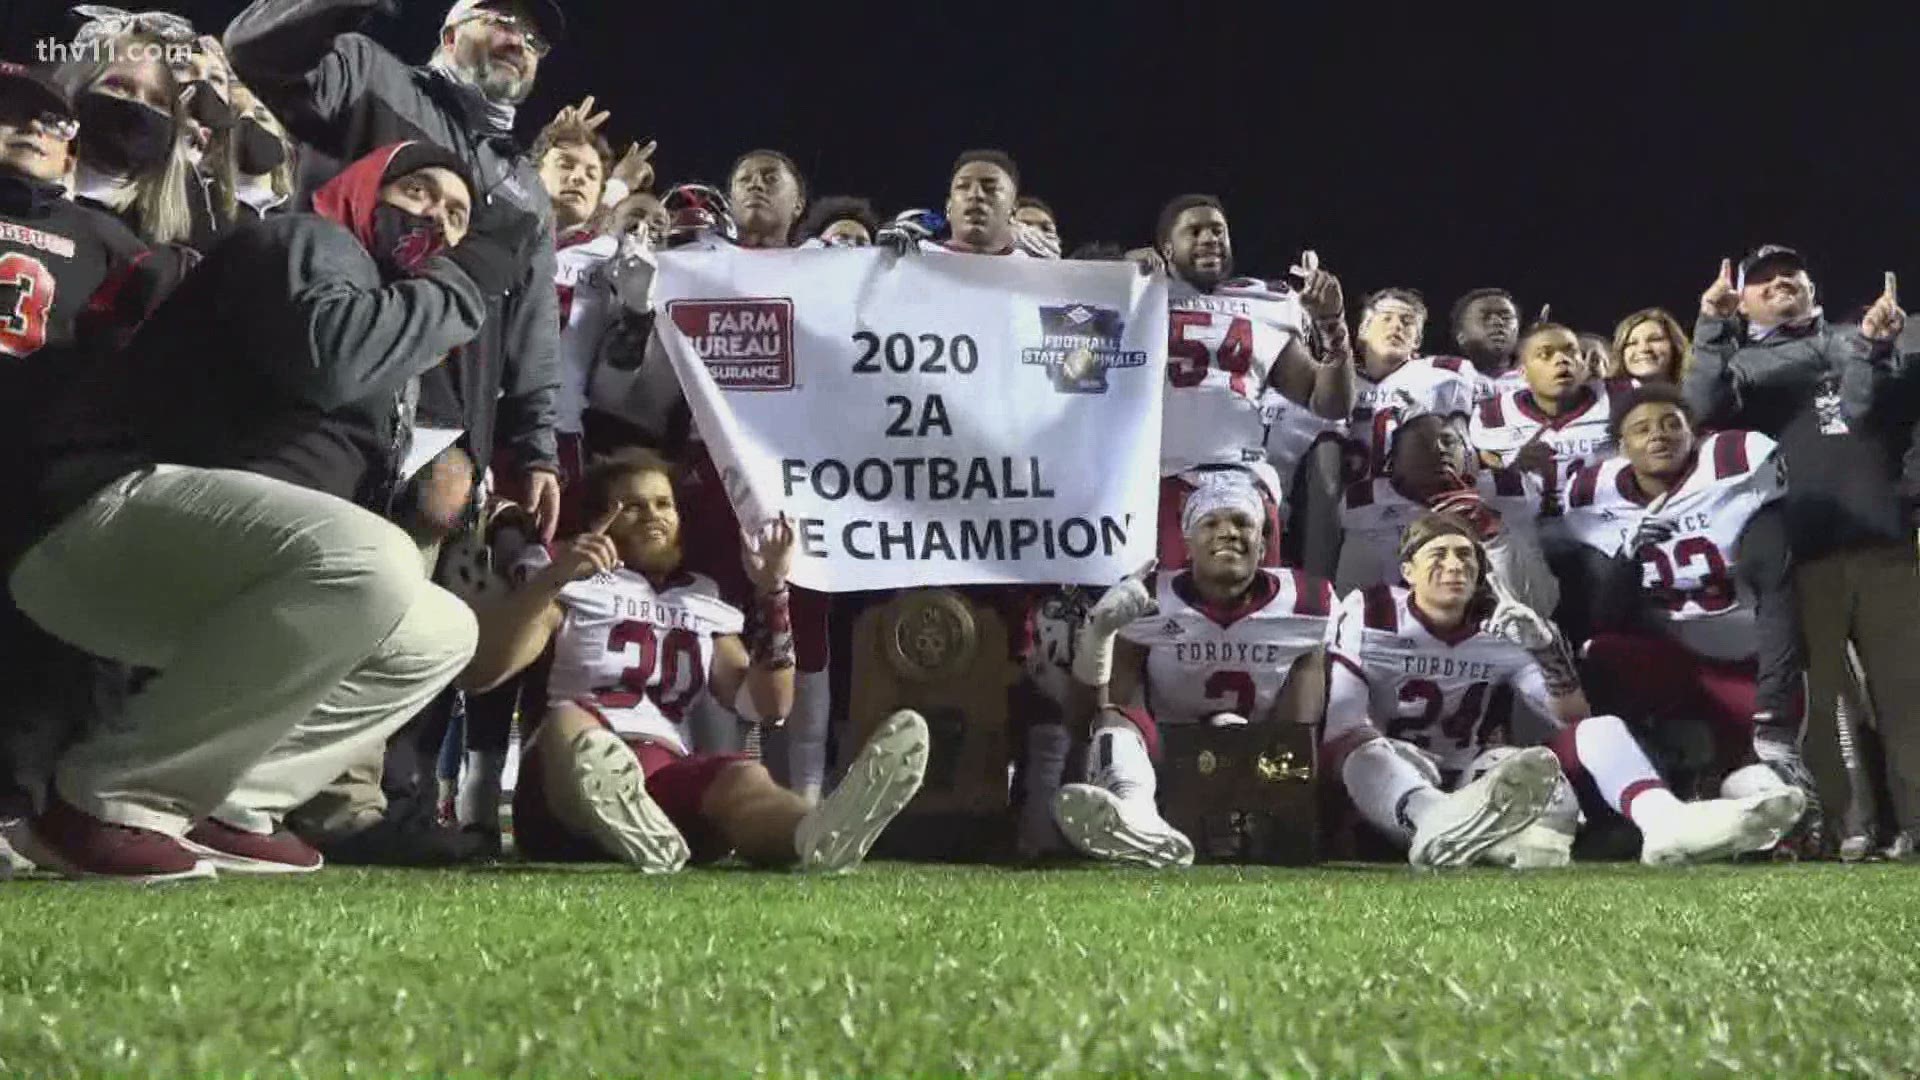 The Fordyce Redbugs are back-to-back football champions, defeating Des Arc for the 2A state title.